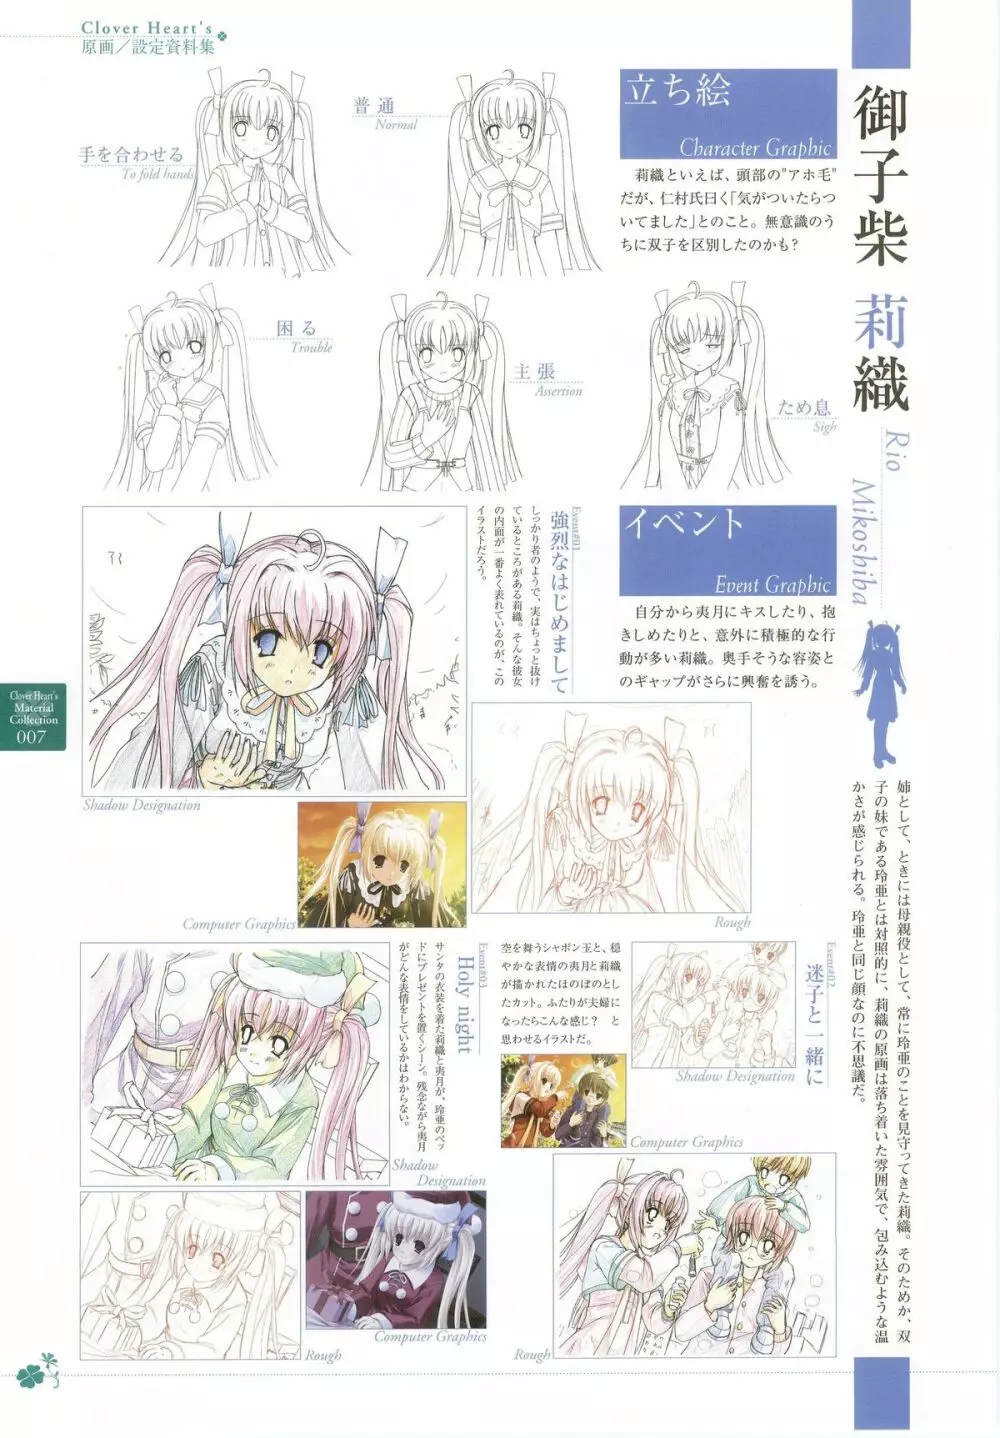 clover heart's visual fan book Page.140